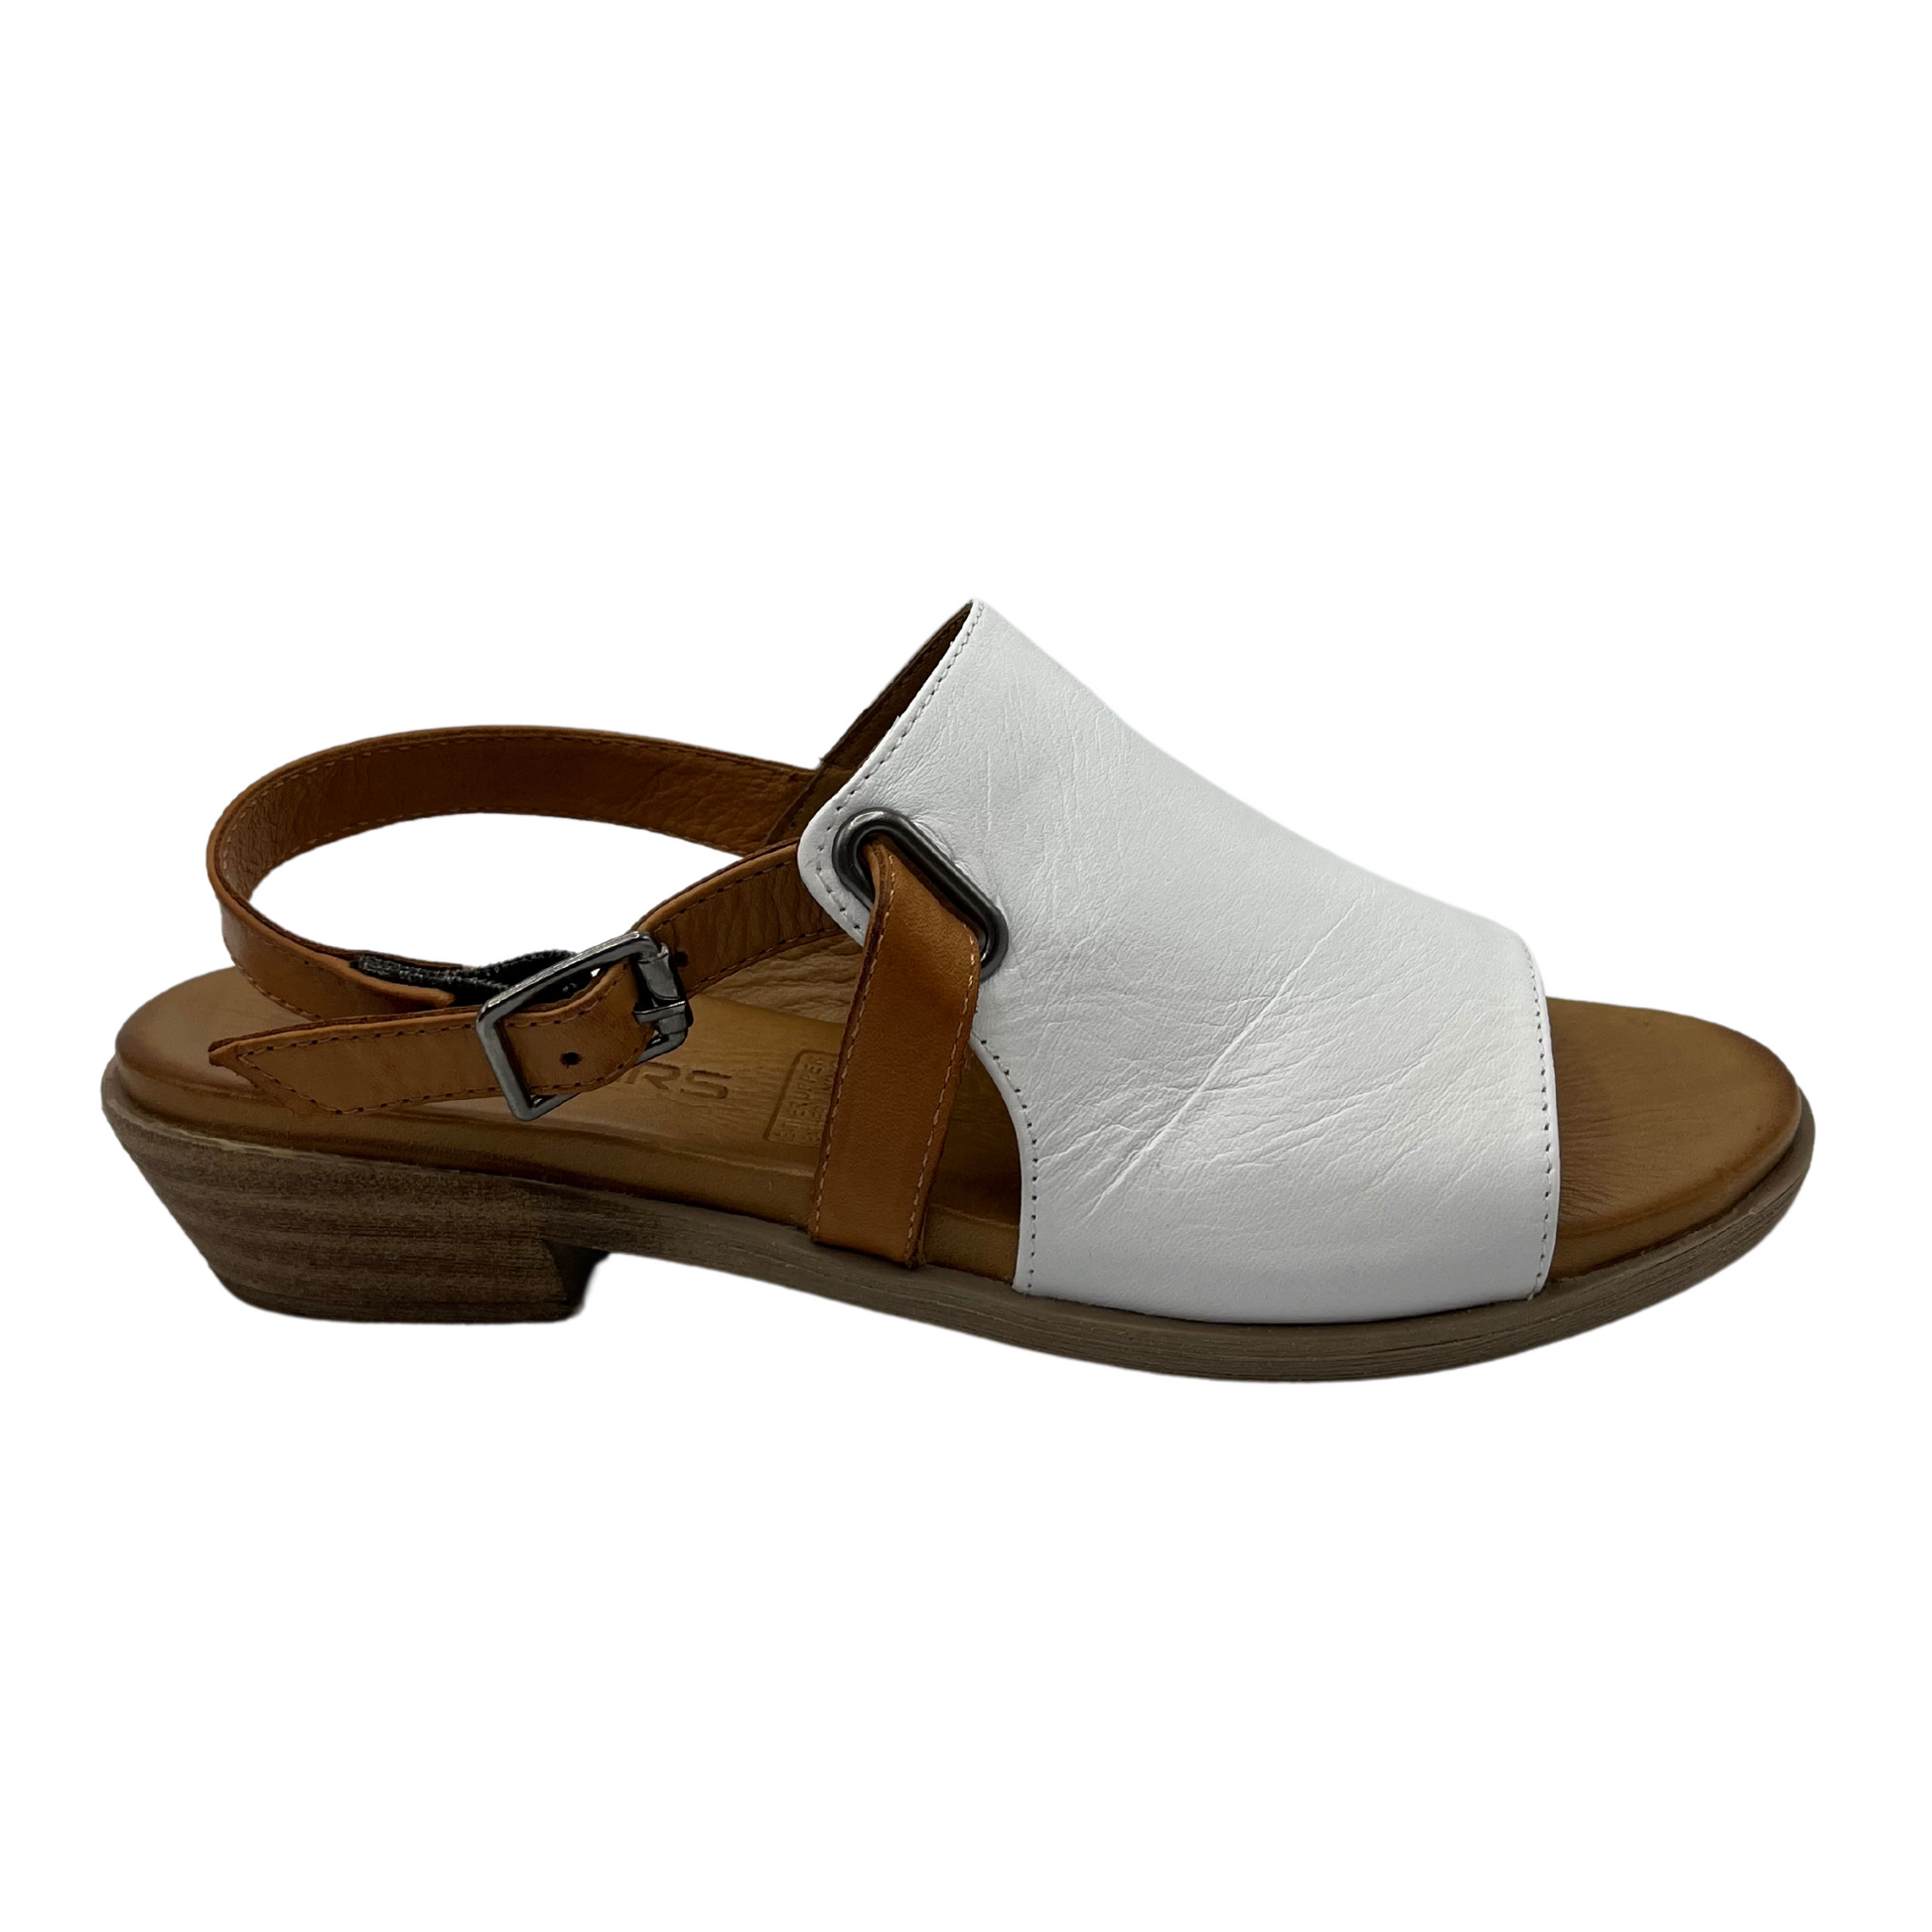 Right facing view of white leather sandal with brown strap and low heel